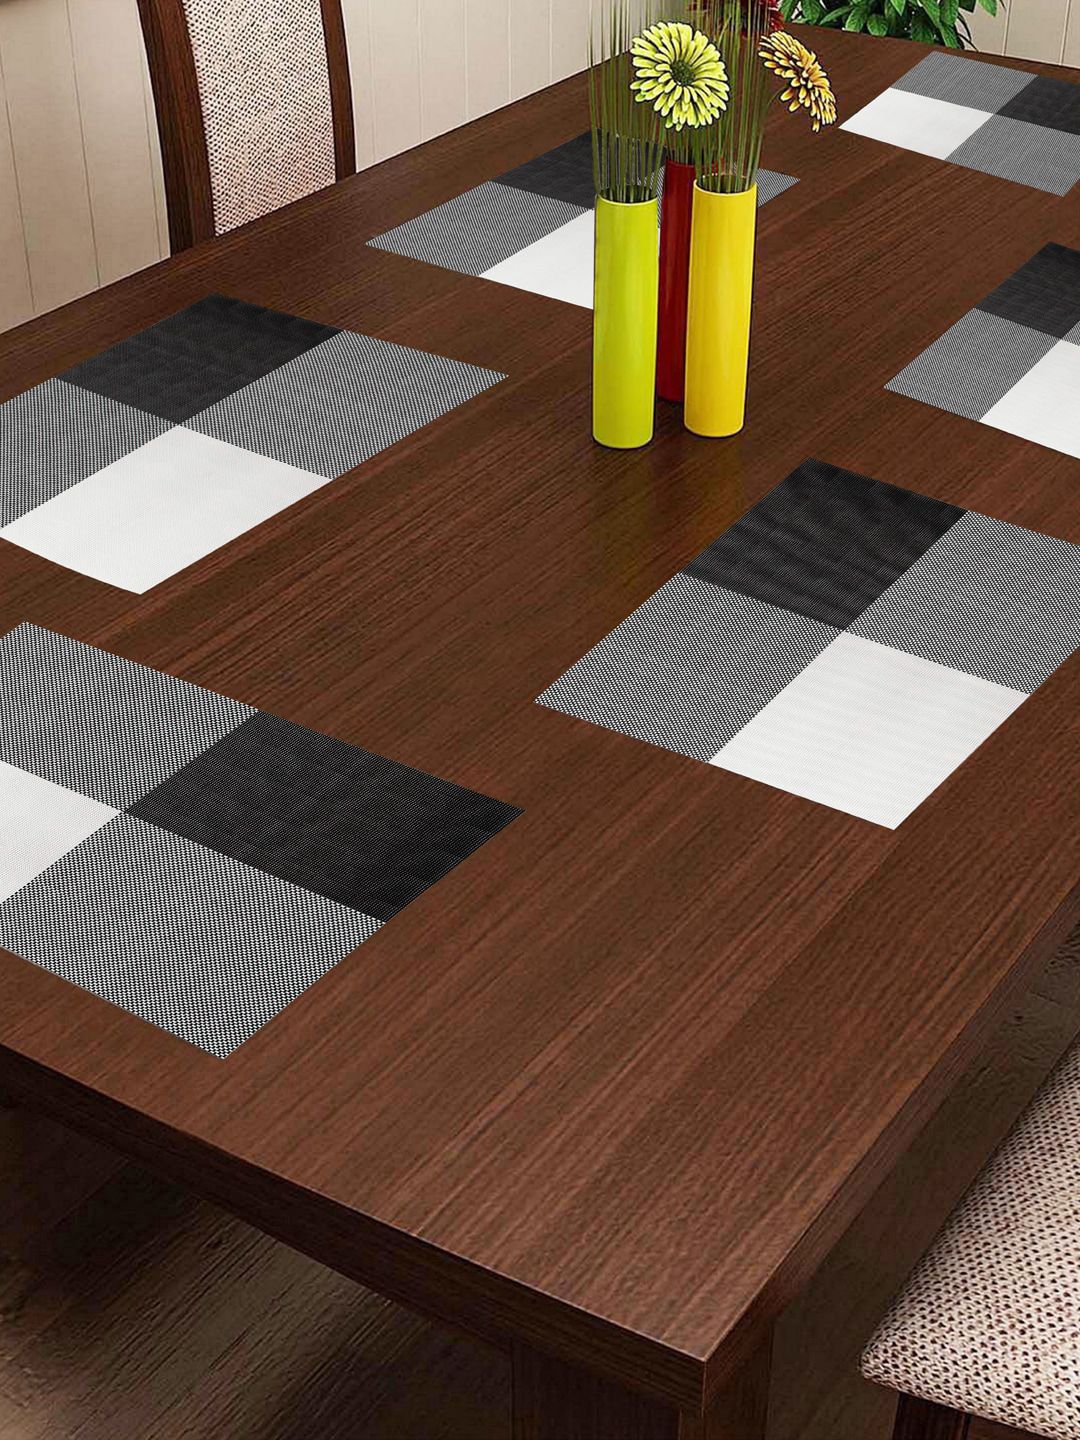 Lushomes Pack of 6 Black & White Design Waterproof PVC Table Mats Price in India